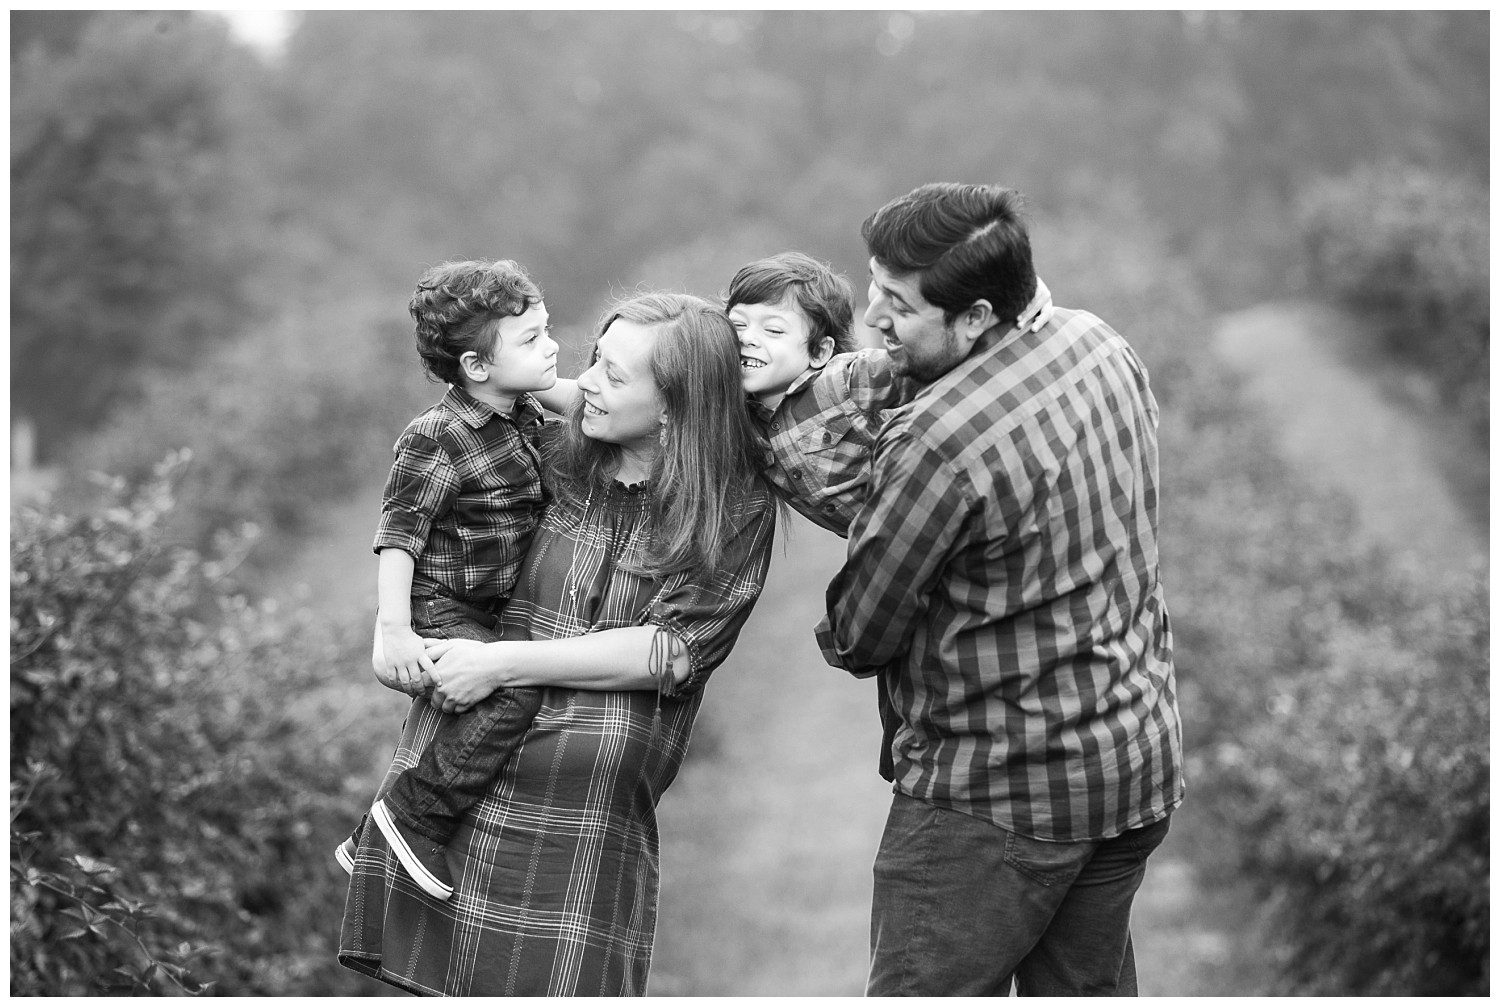 Family Lifestyle Photography at Justus Orchard